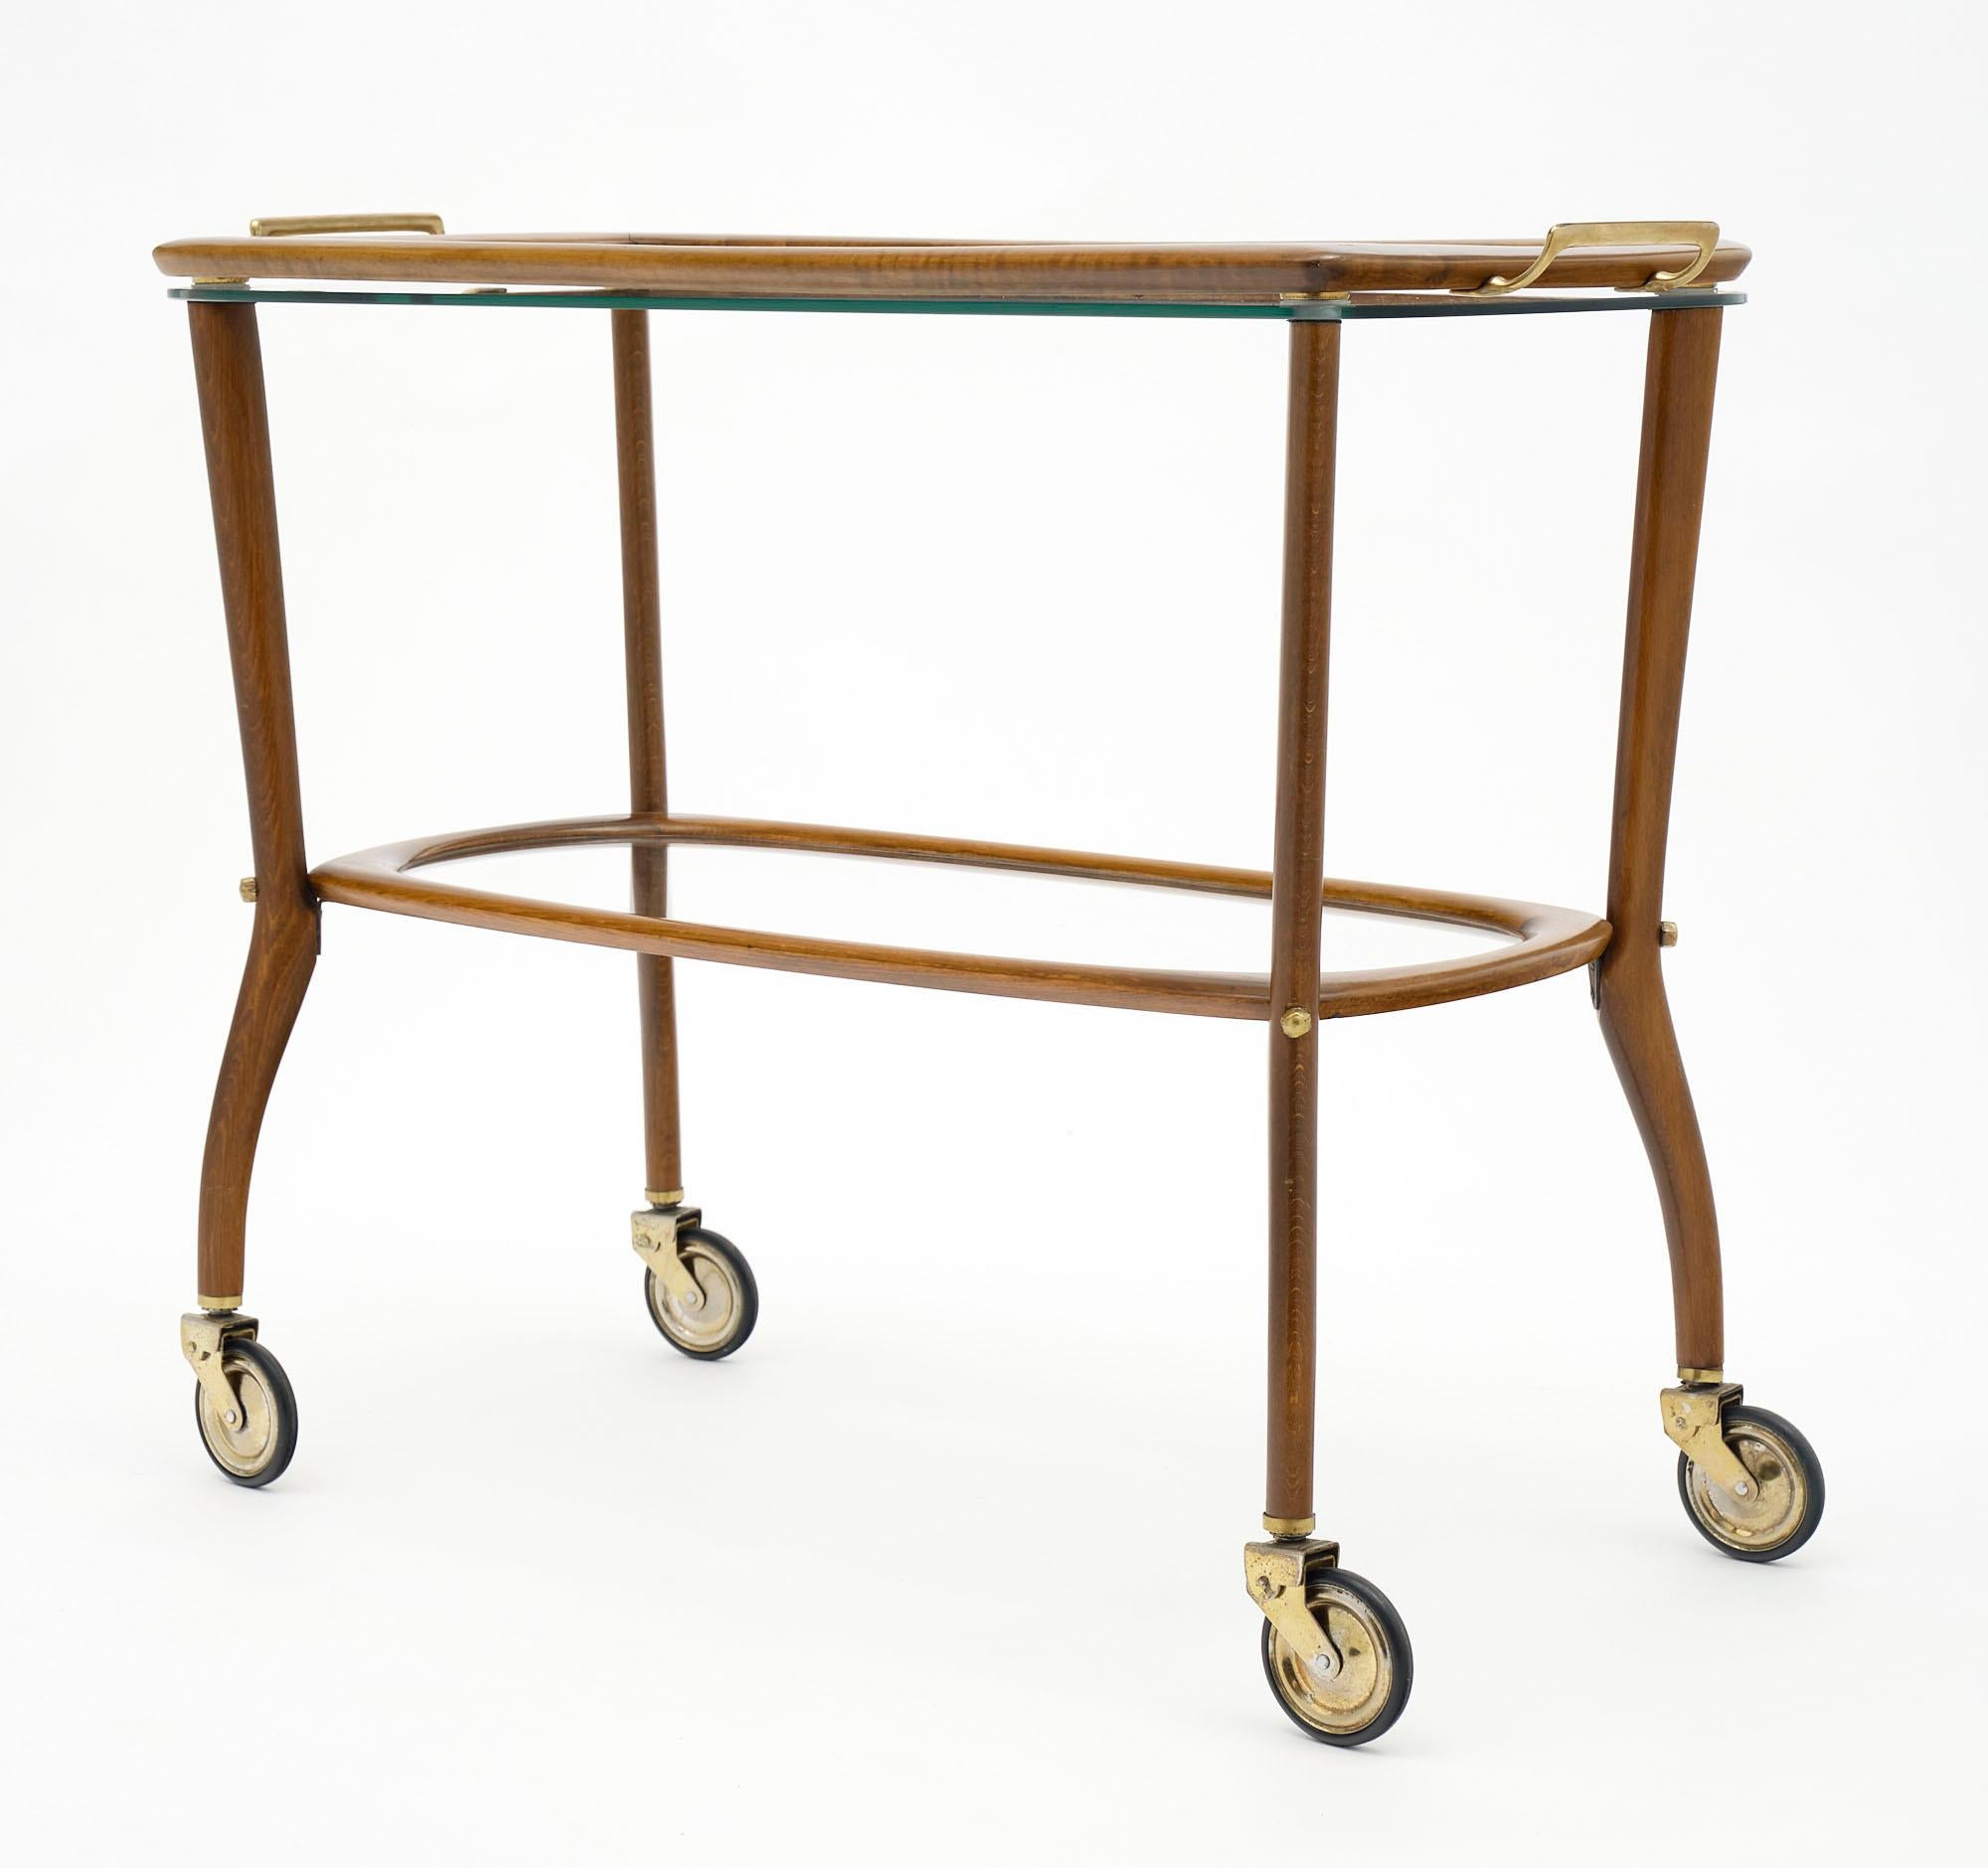 Bar cart from Italy by designer Cesare Lacca. This piece is made of beech wood and glass. There is a top tray that lifts off for functionality.